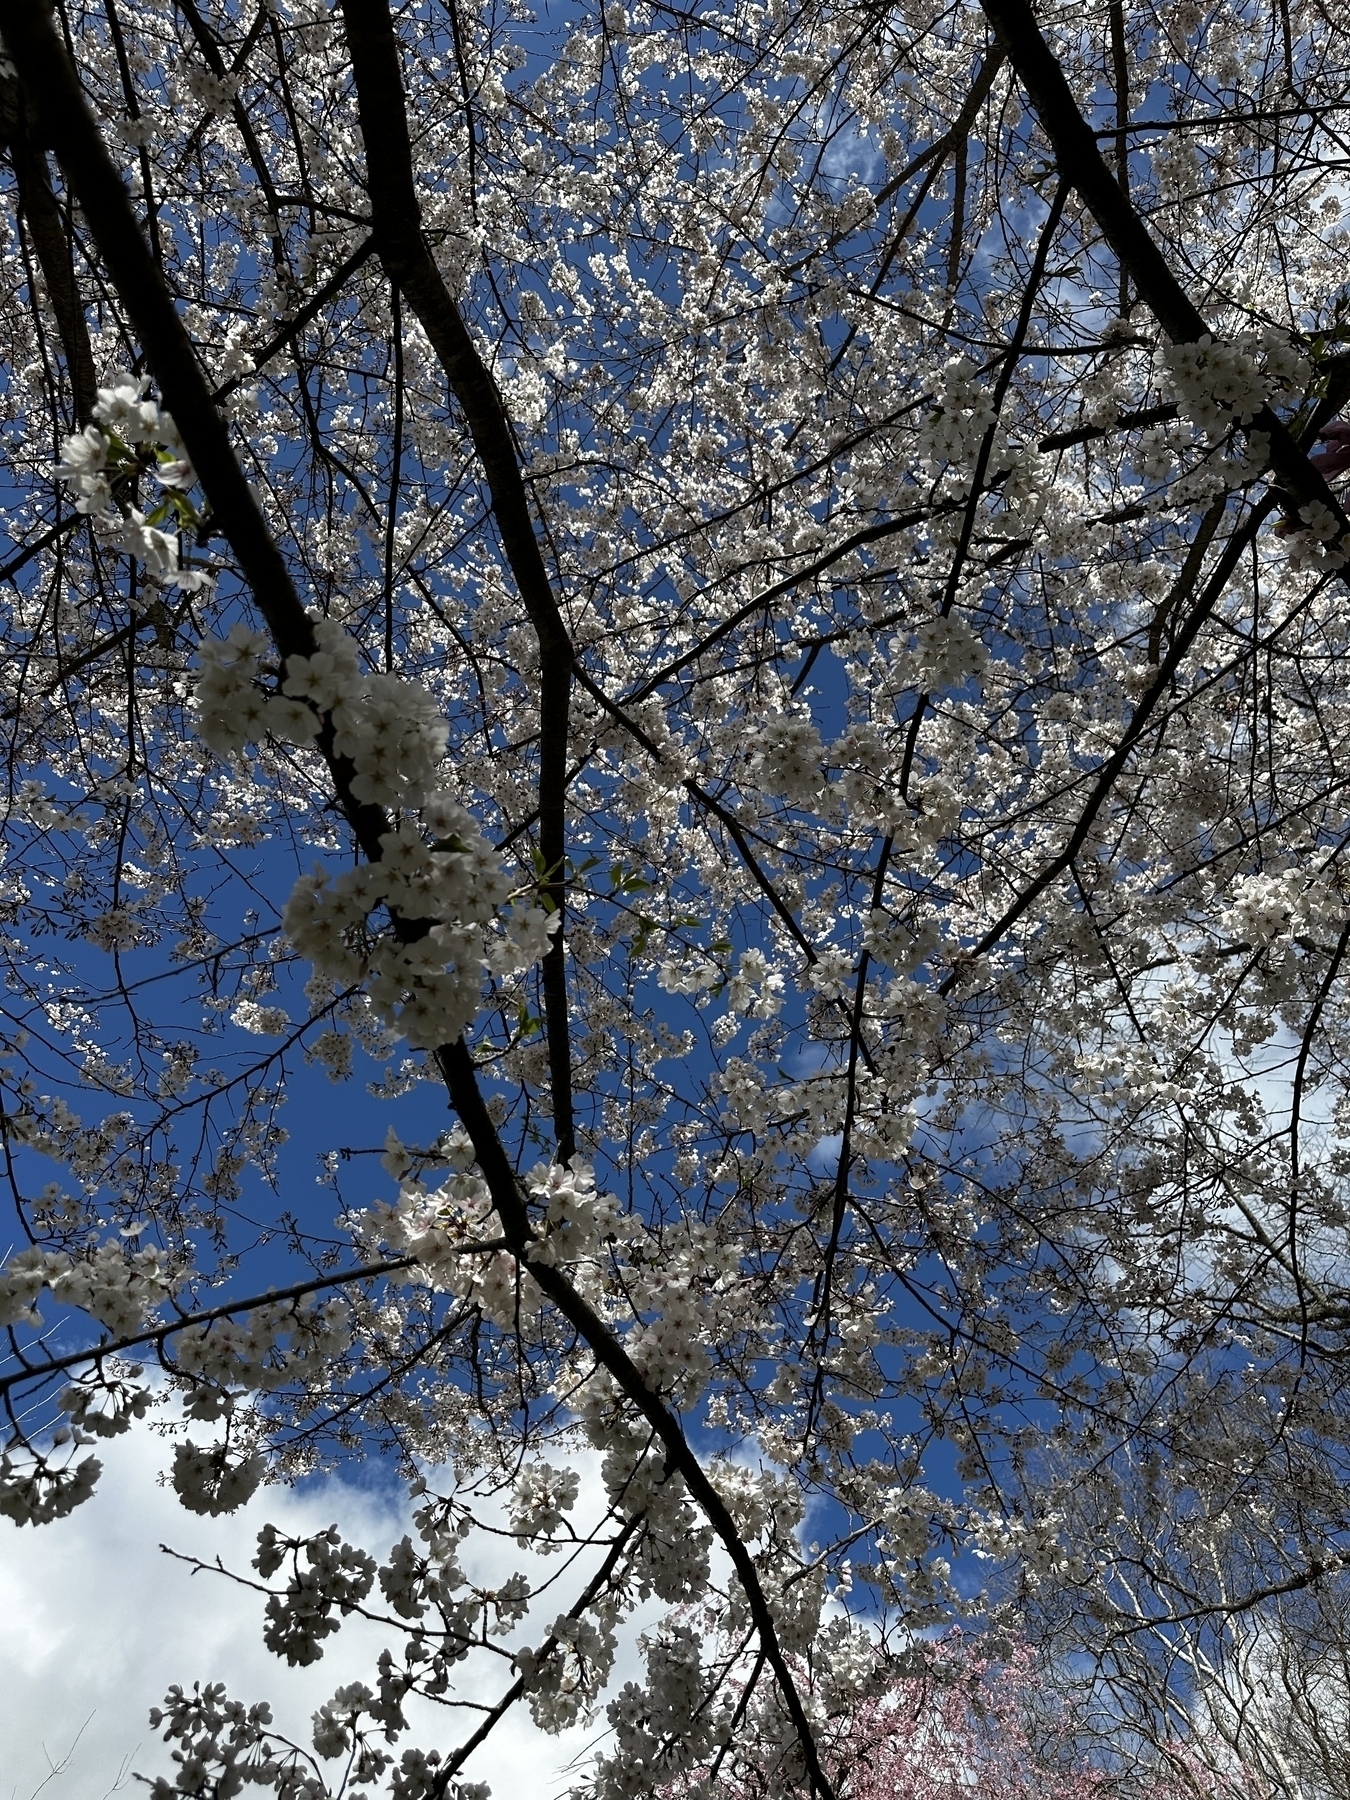 View looking up from underneath a tree with white cherry blossoms against a blue sky